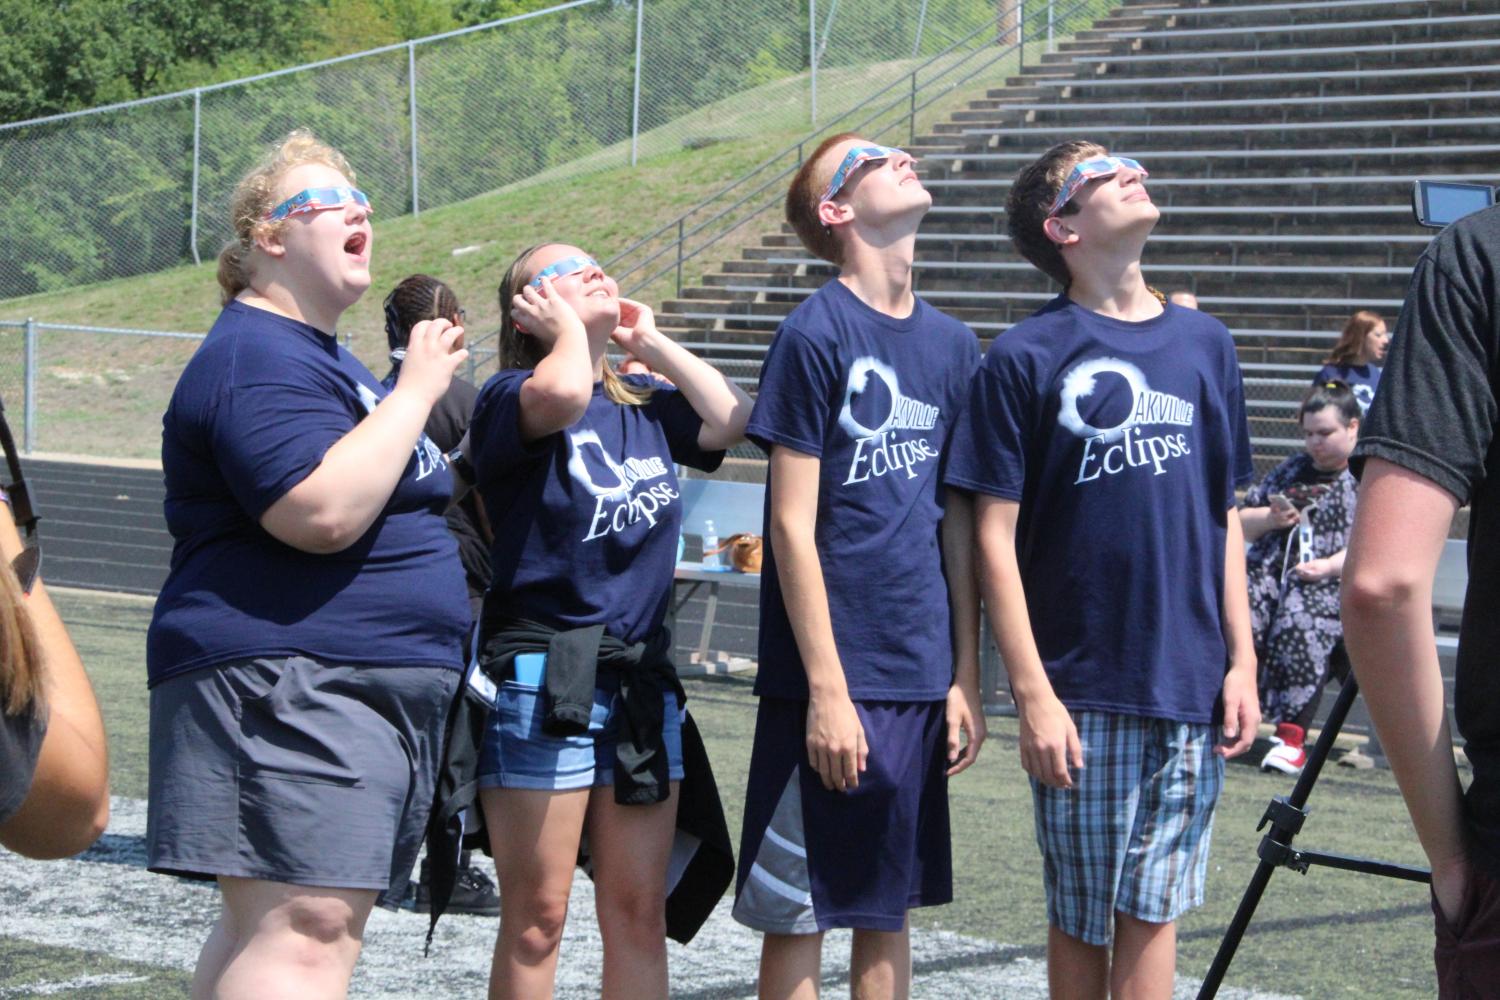 Wearing+their+eclipse+shirts%2C+a+group+of+students+looks+up+mesmerized+by+the+eclipse.